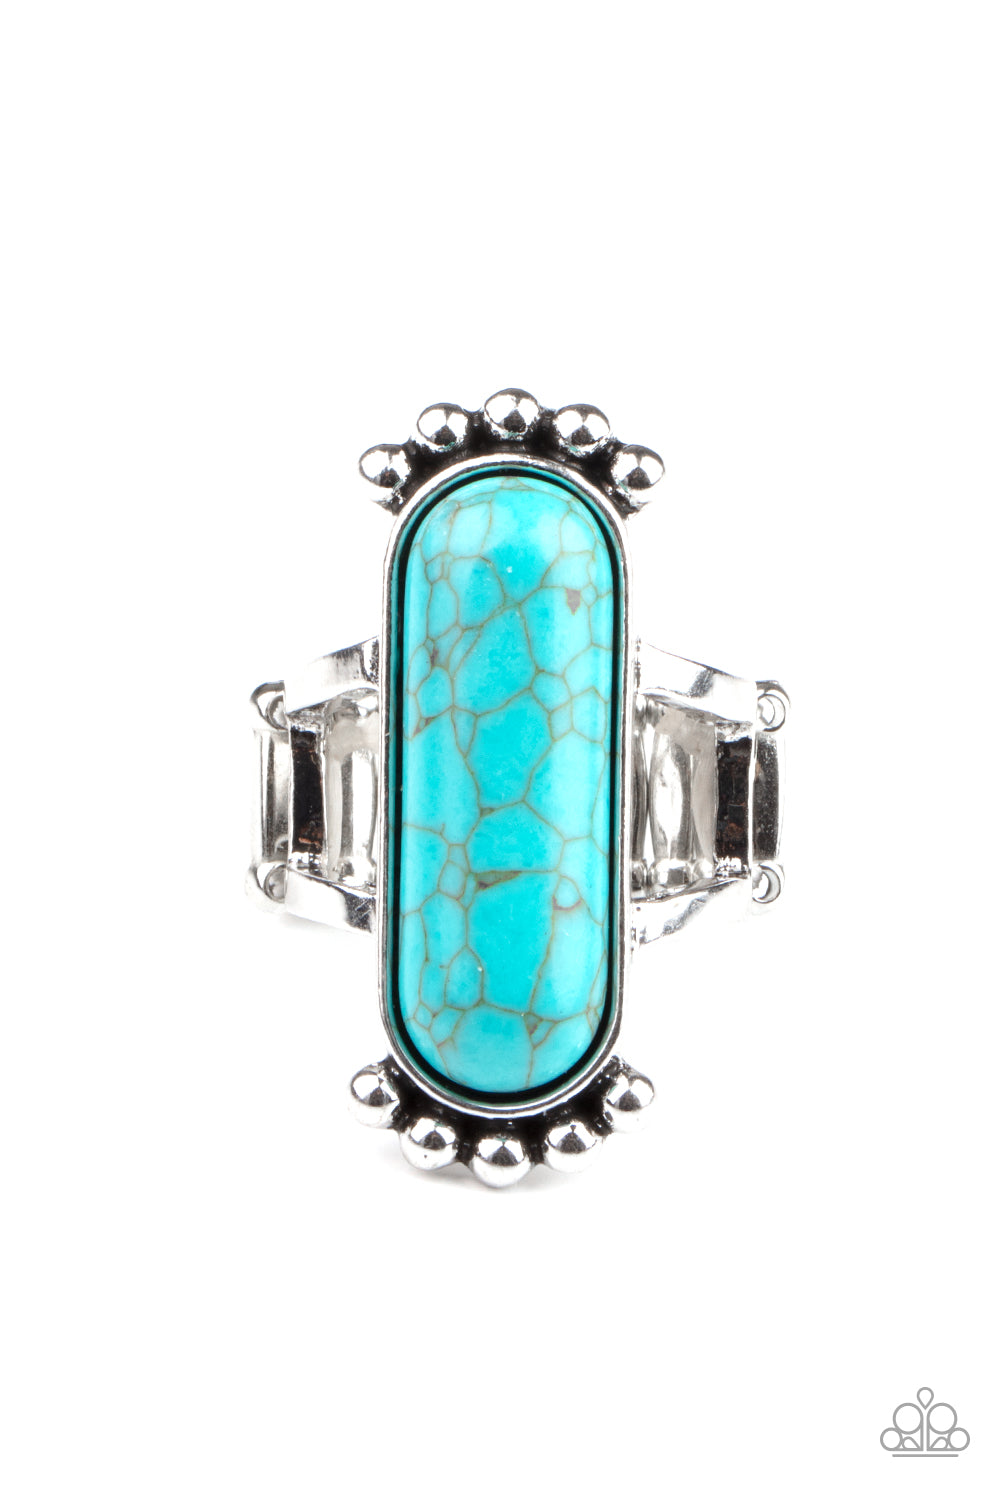 Ranch Relic Blue Ring - Paparazzi